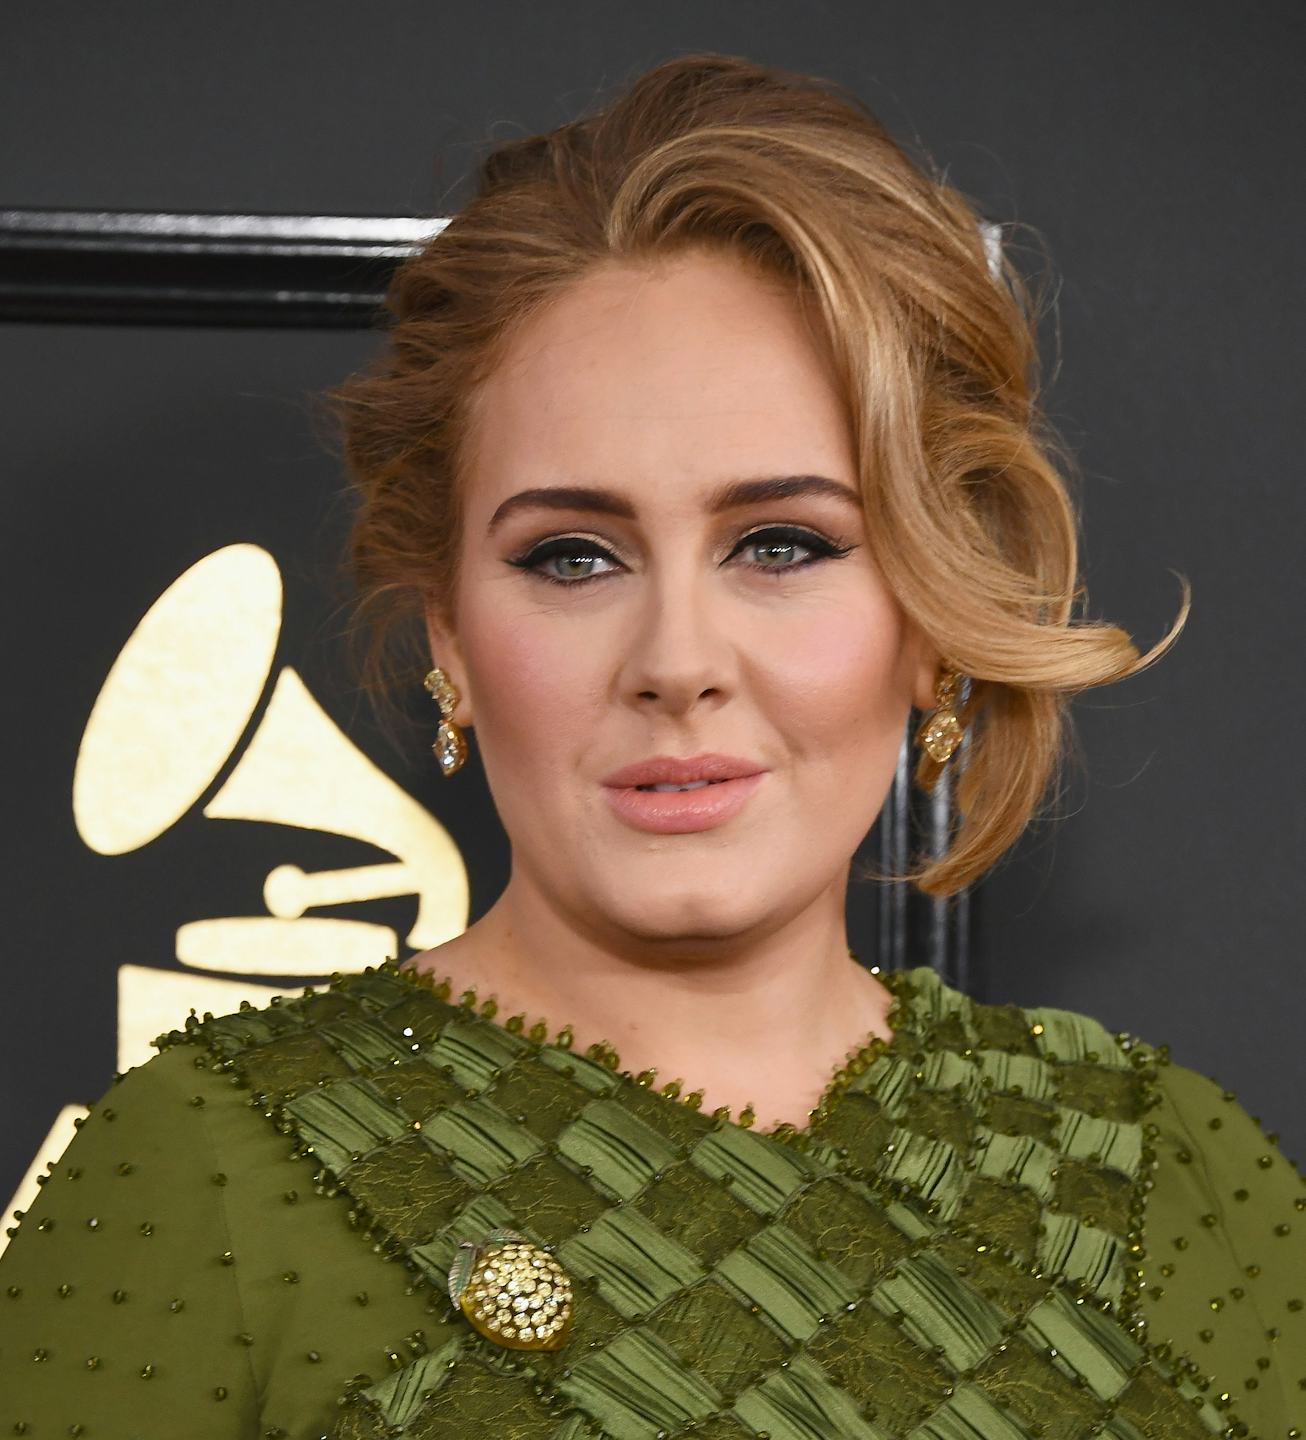 Adele addressed her Jamaican carnival outfit controversy